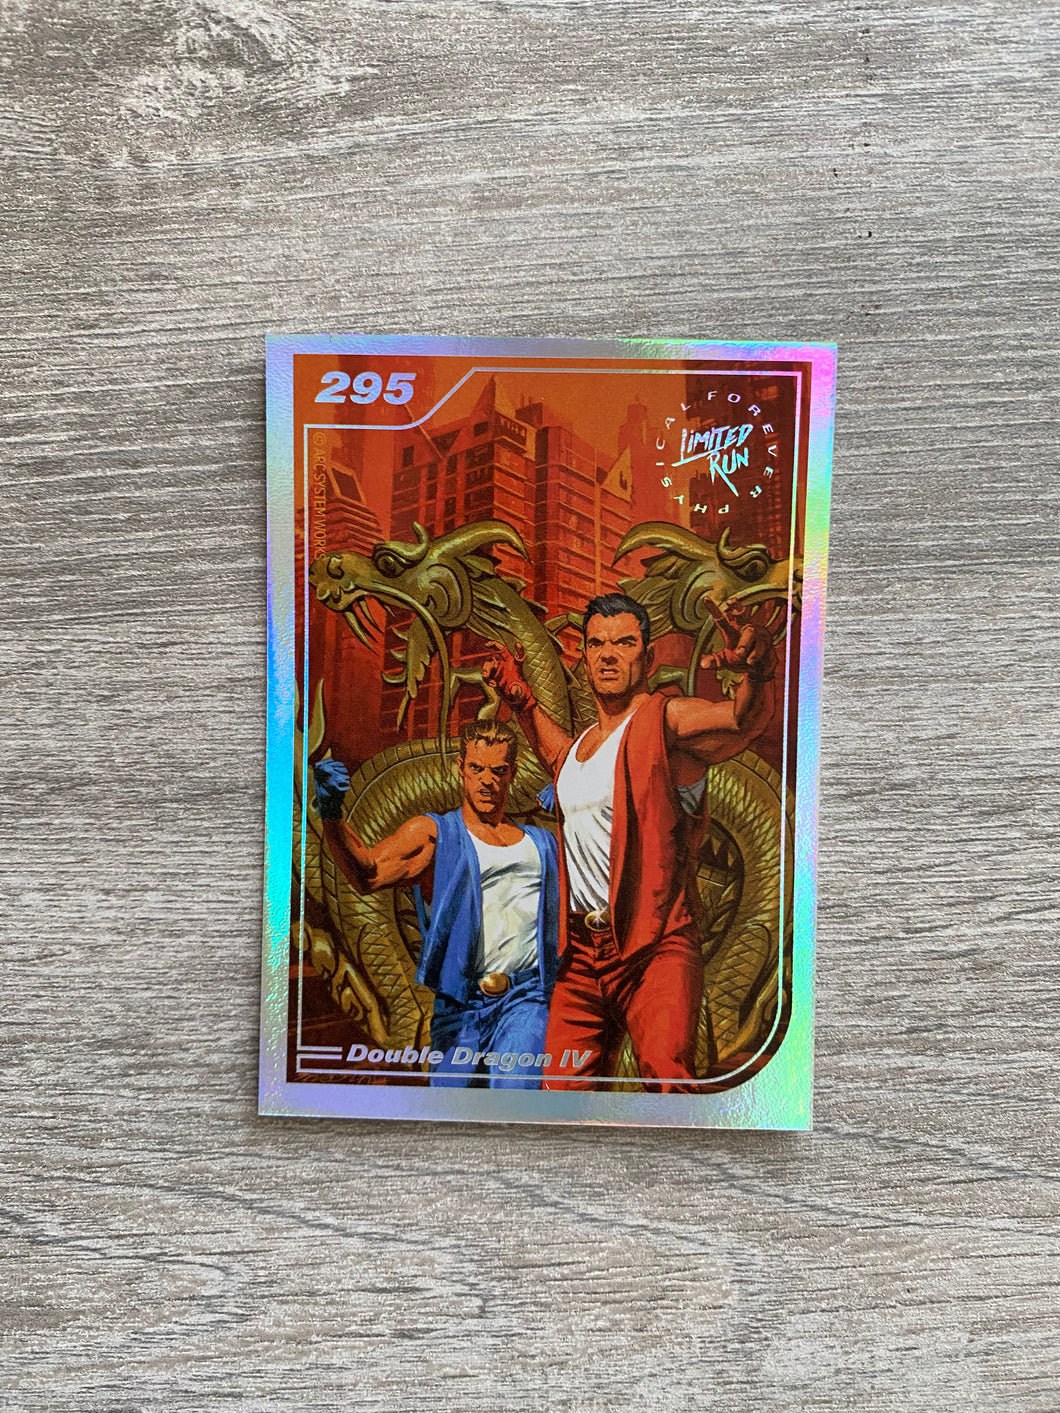 Gen2 #295 Silver Double dragon IV Limited run games trading card